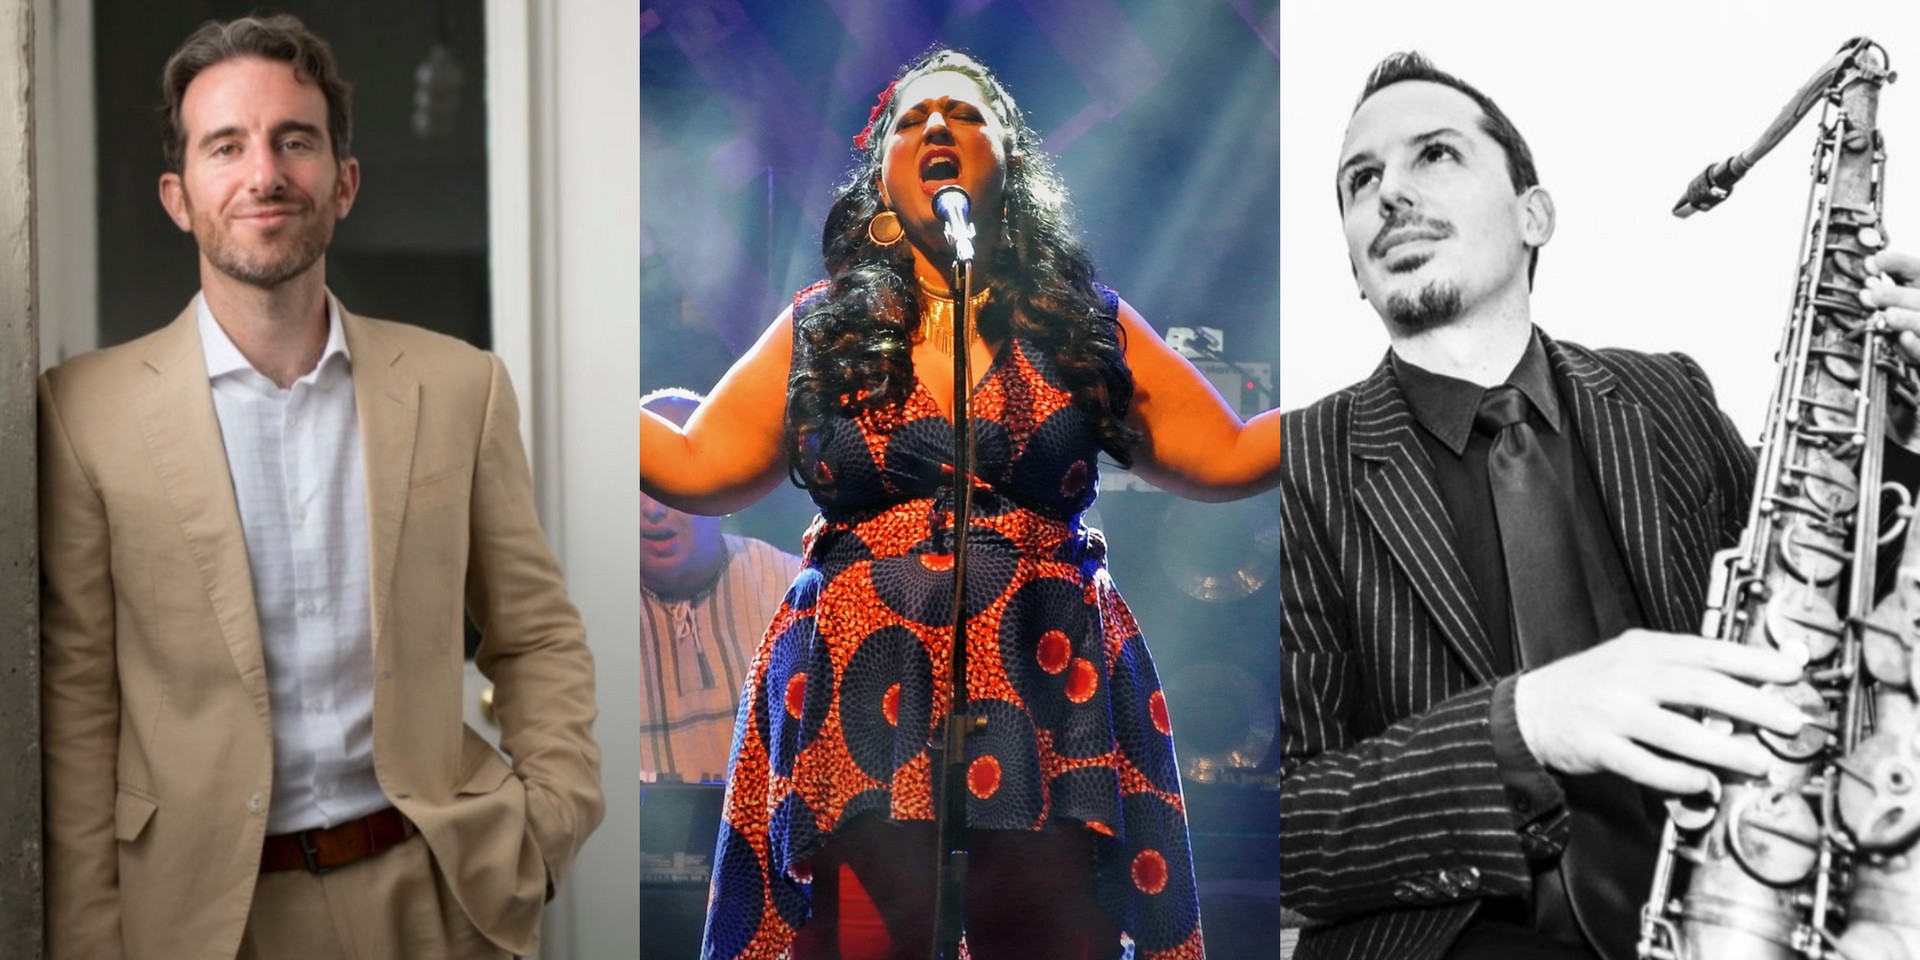 Jazz At The Red Dot 2019 announces complete list of performers, workshops and more 